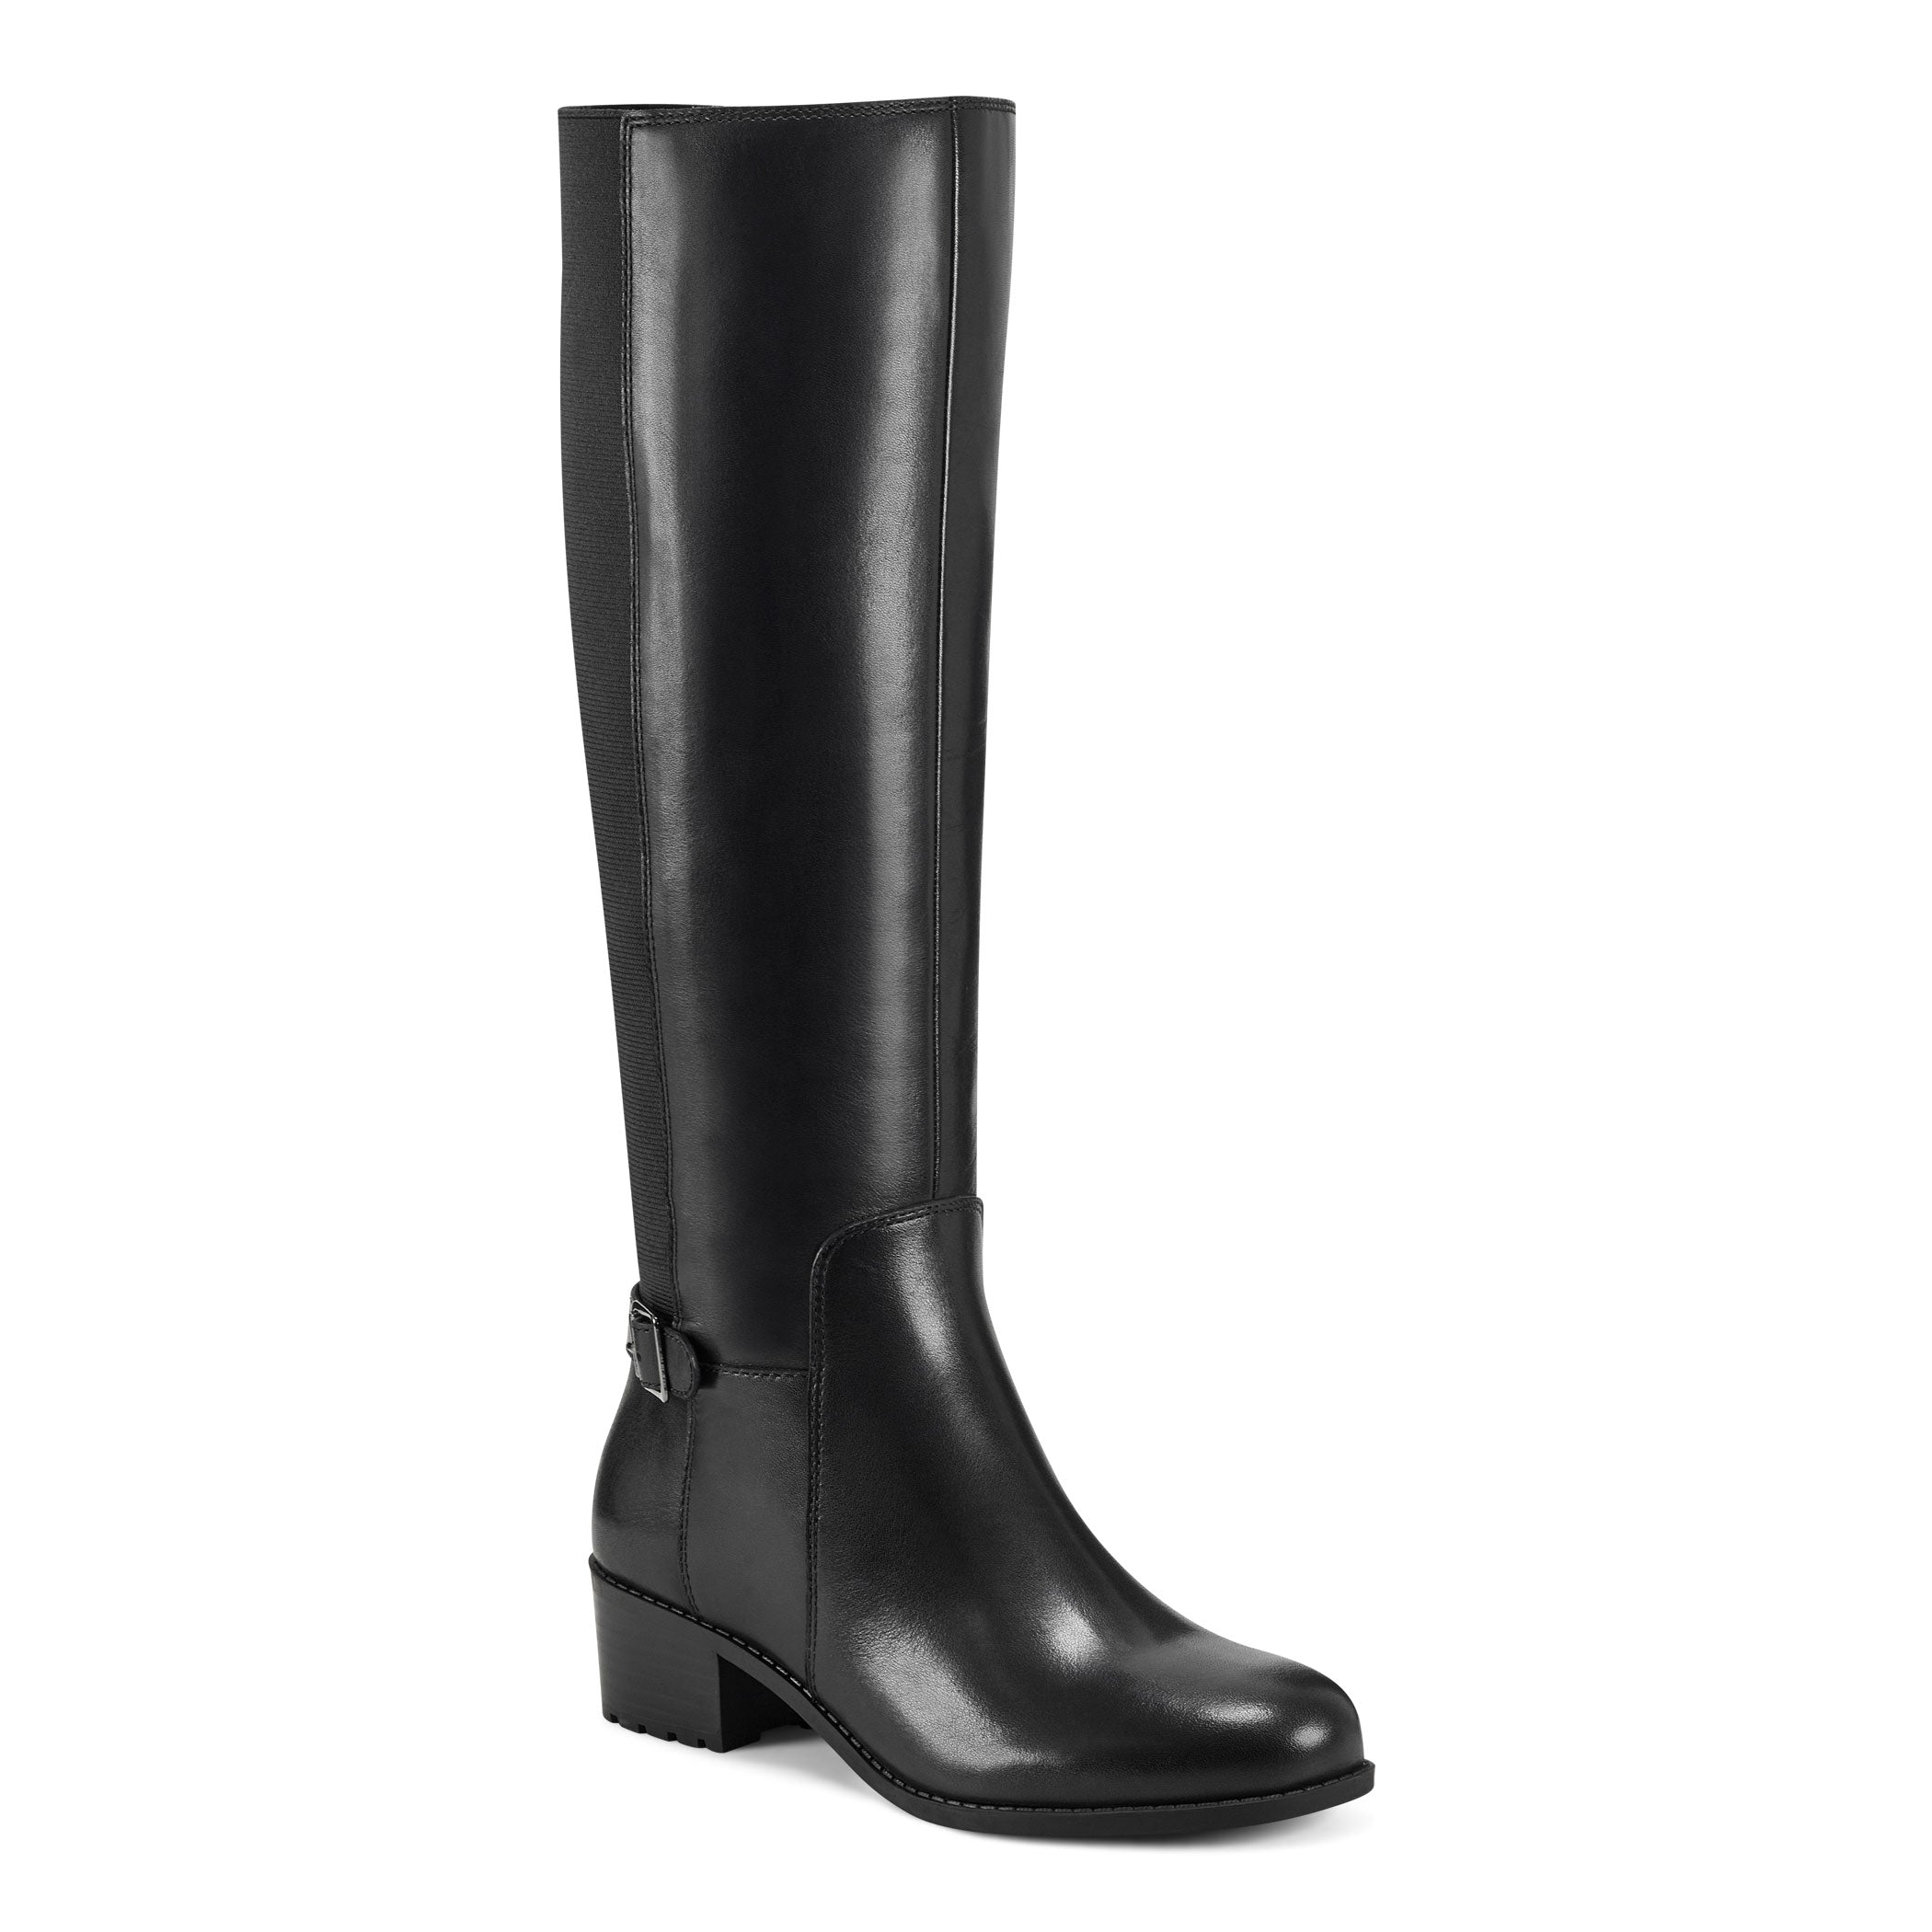 A Guide to Fitting Calf Boots, Shoe Zone